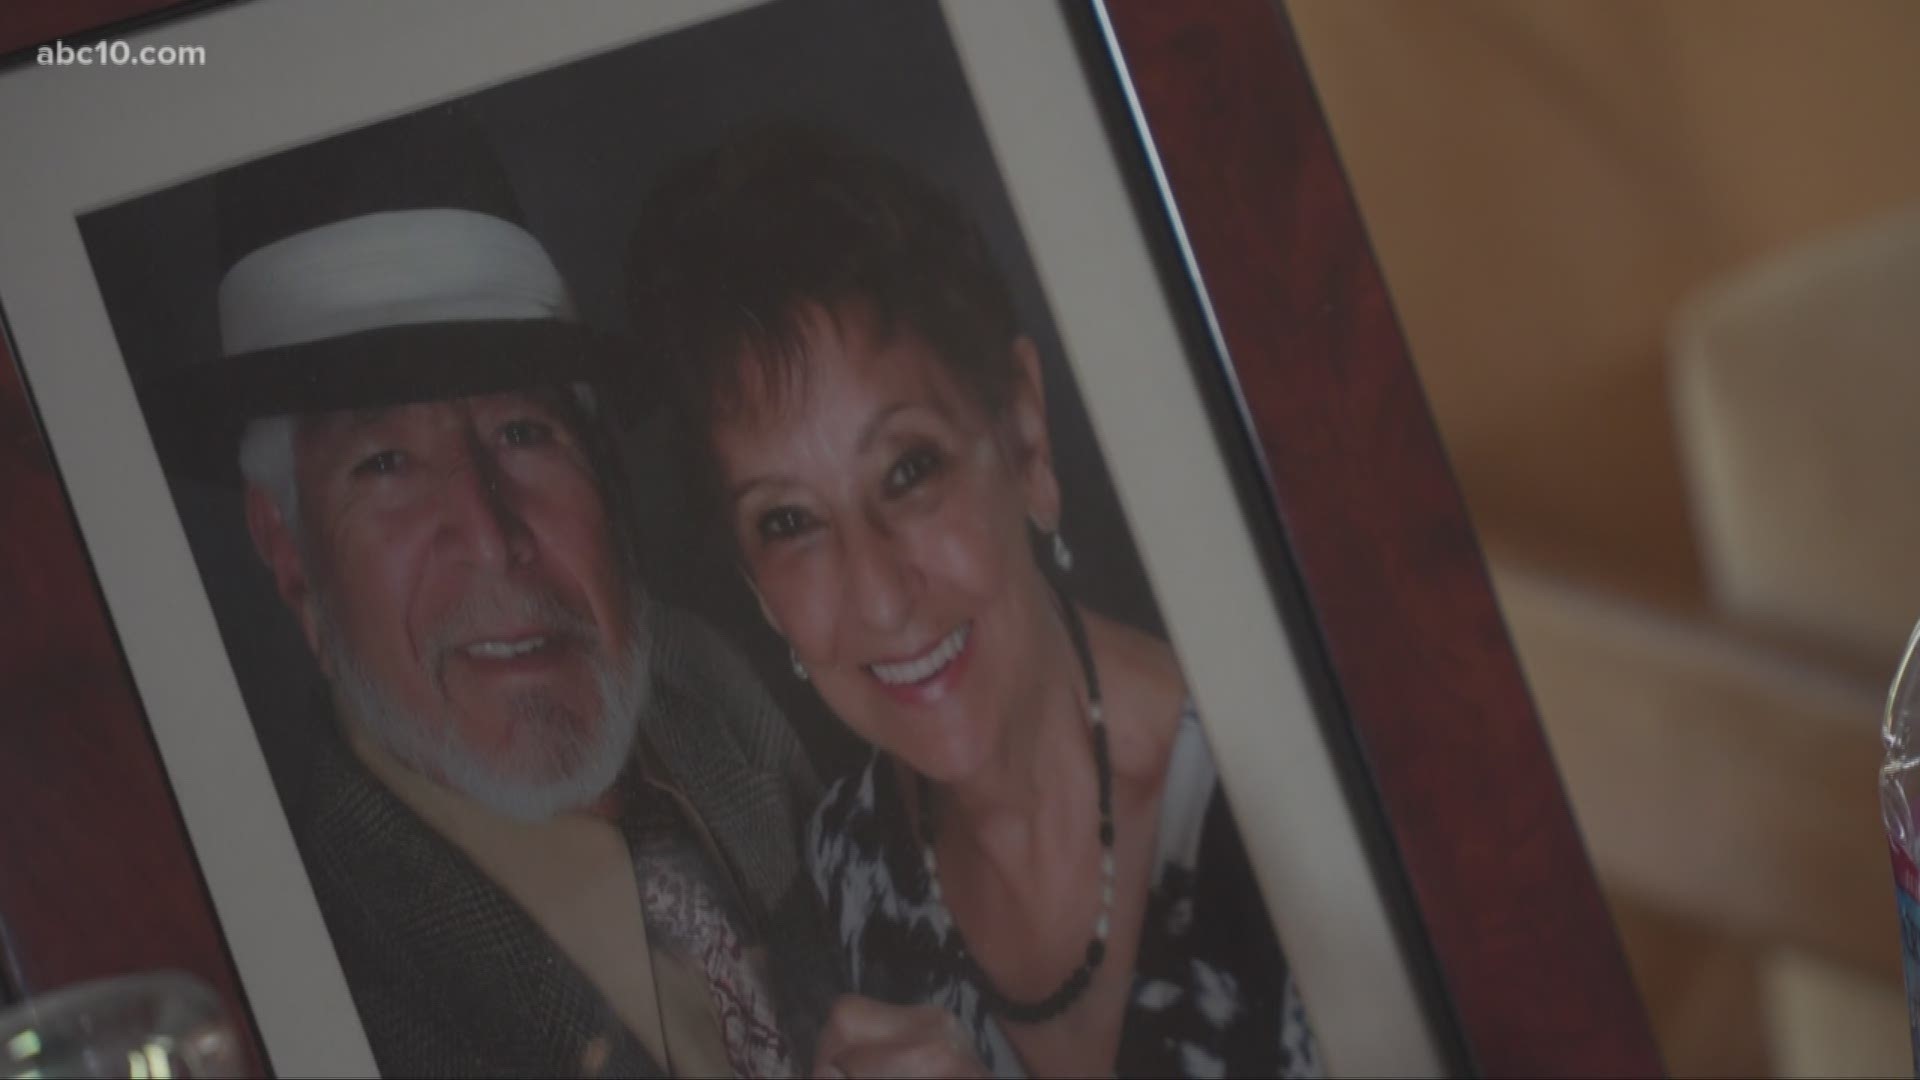 Edward Villasenor died near his home on Nov. 7, 2019. He celebrated his 49th wedding anniversary the day he died.